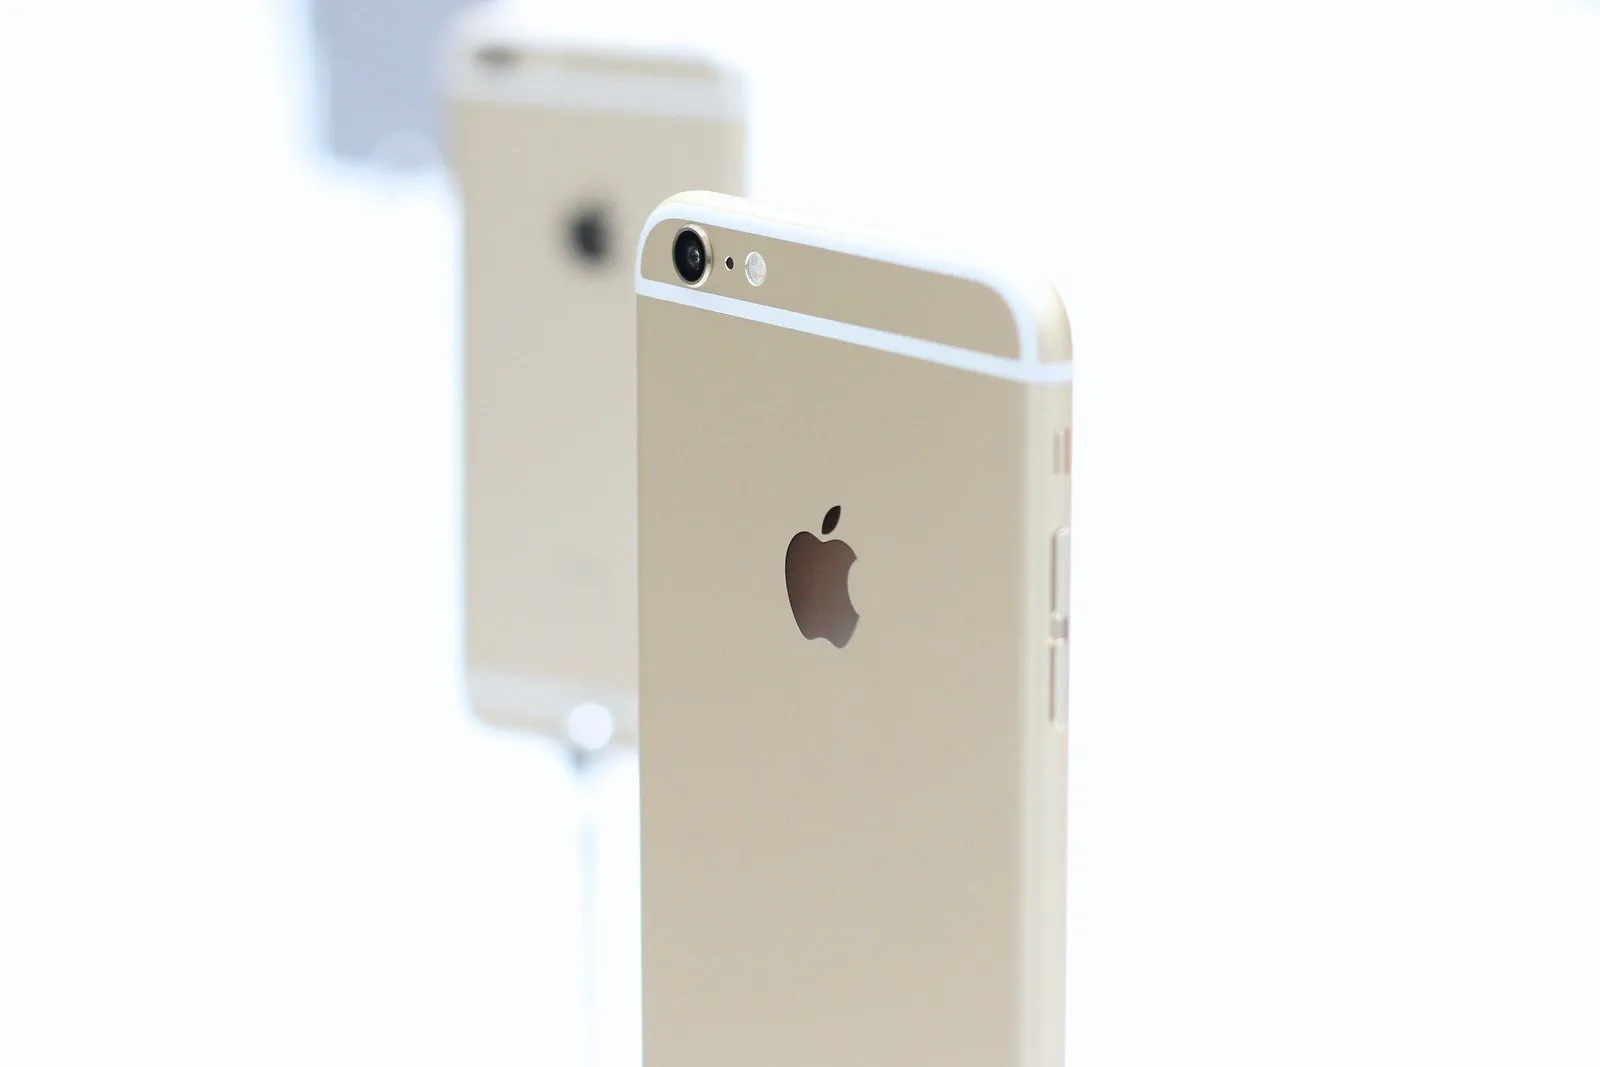 Apple recognized the iPhone 6 as a "vintage" product